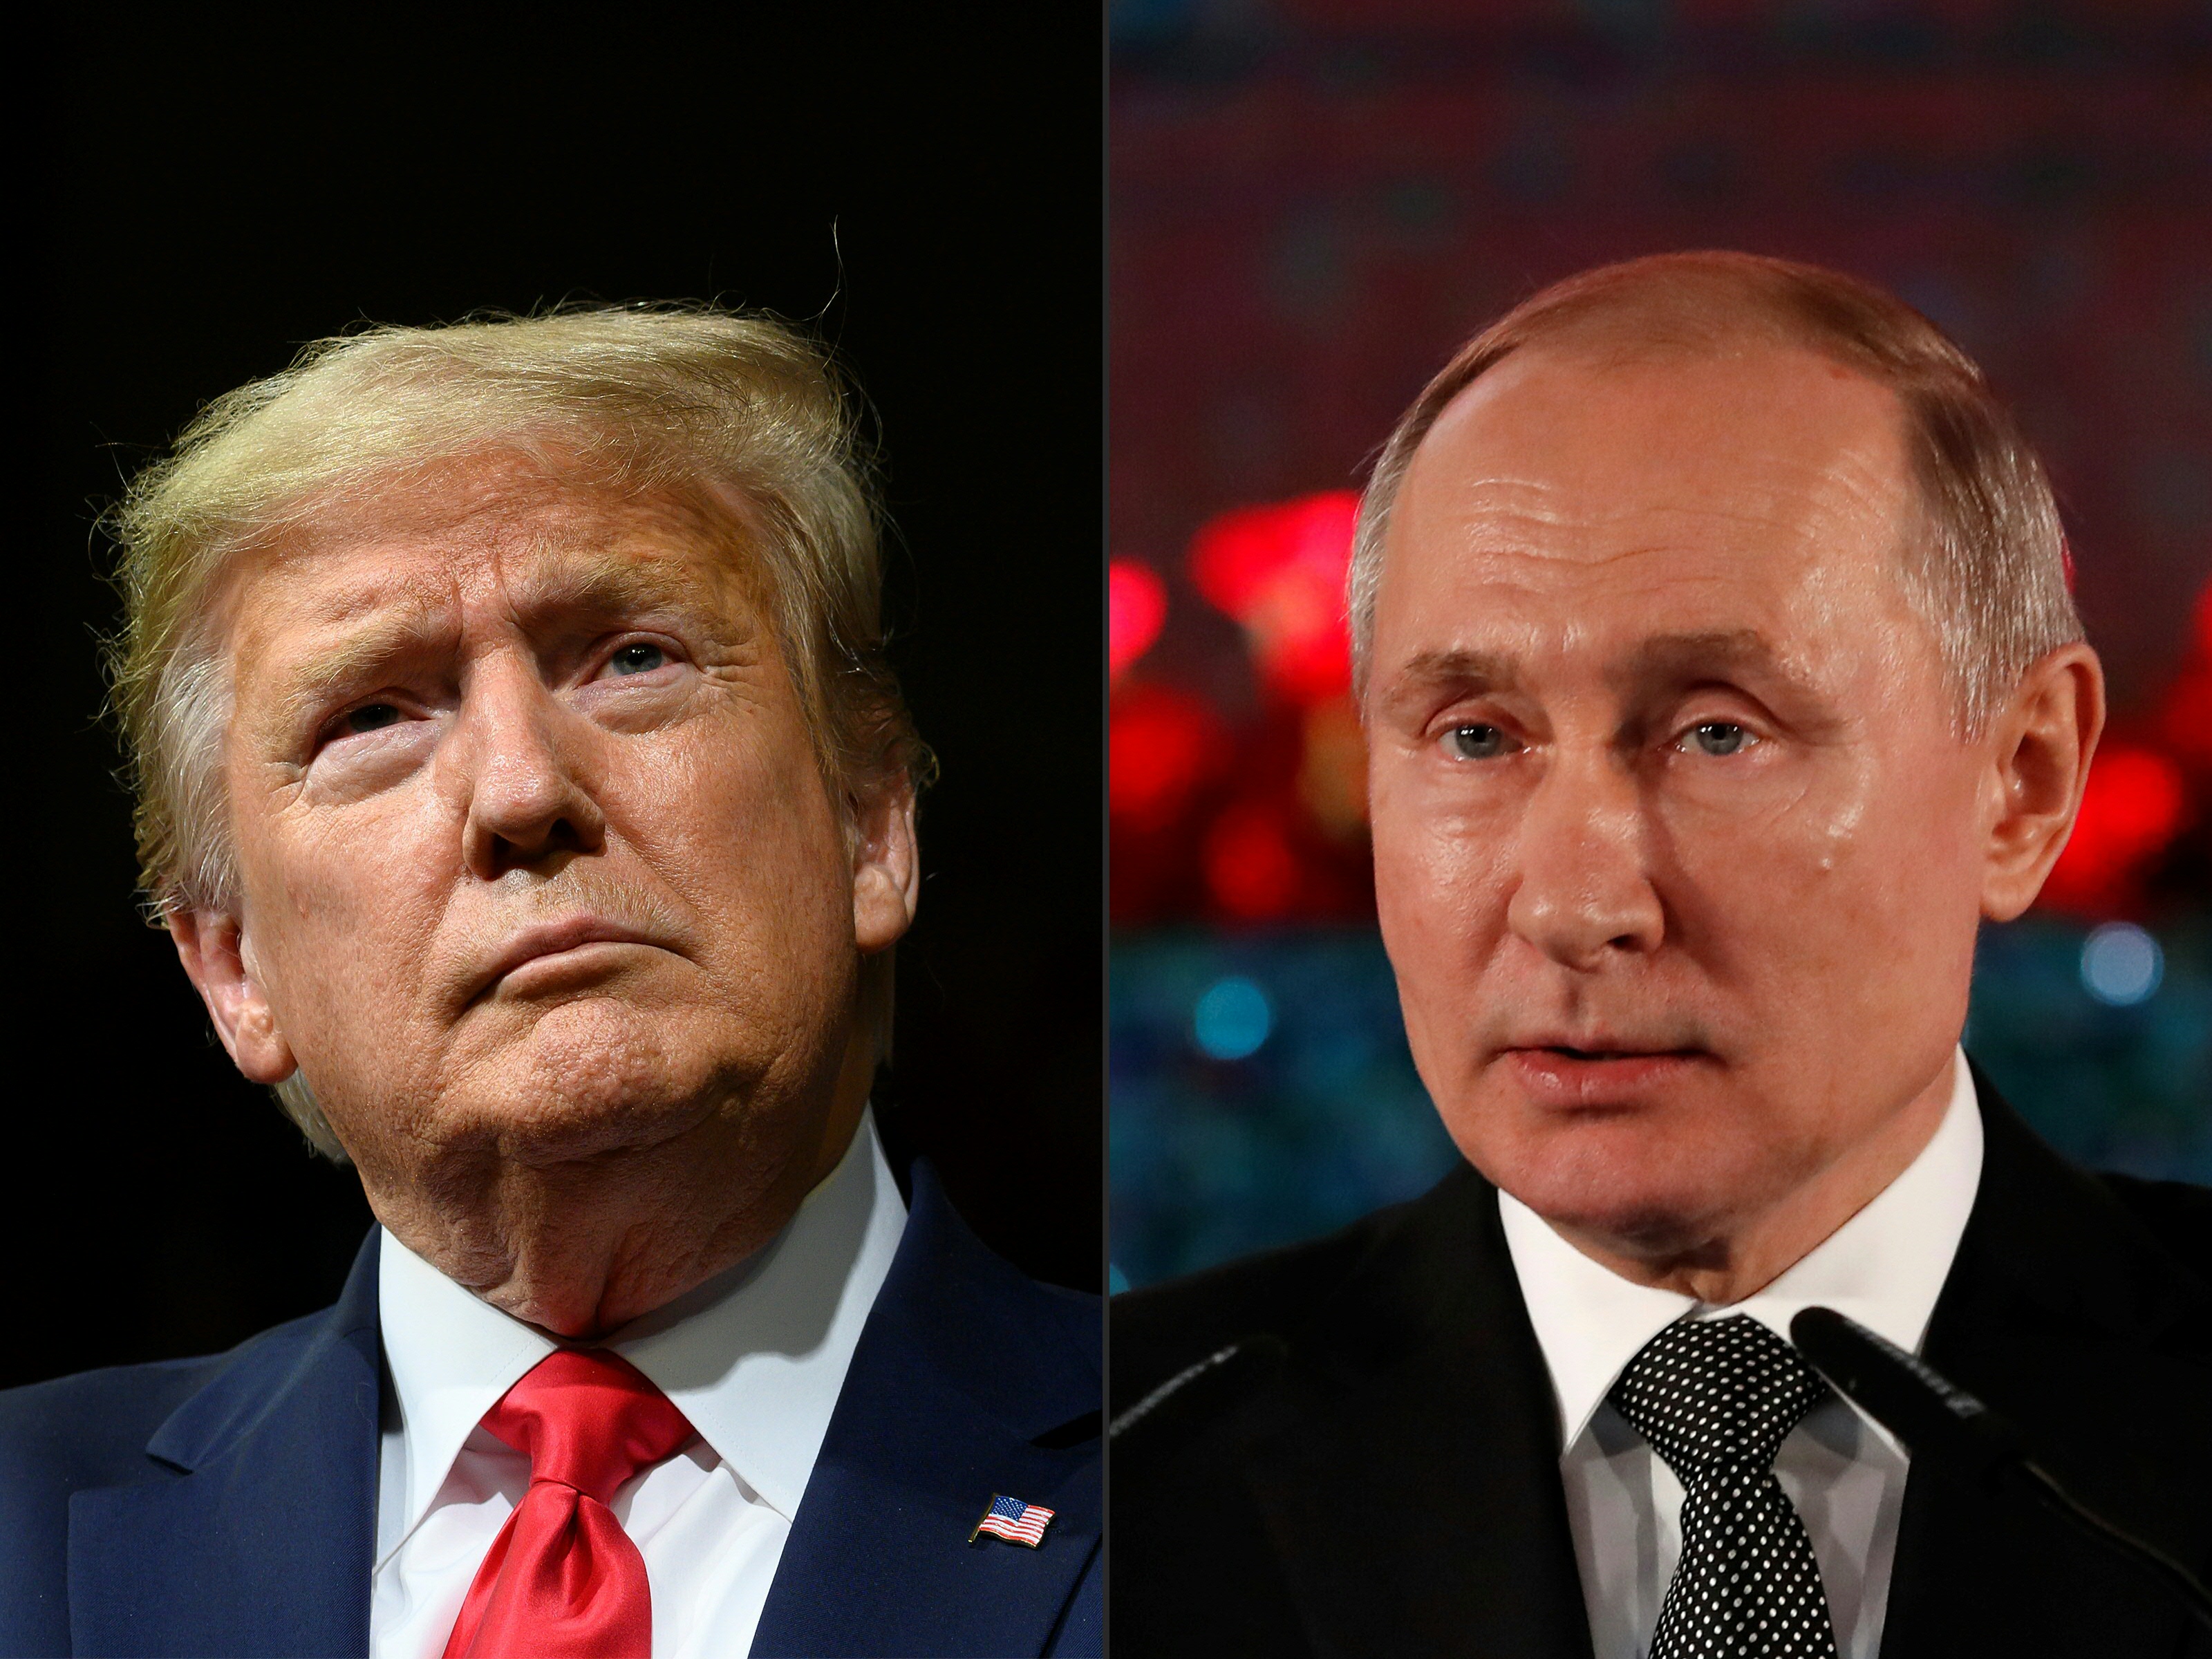 President Donald J. Trump, at a rally in Phoenix, Ariz., on Feb. 19, and Russian President Vladimir Putin, delivering a speech in Jerusalem on Jan. 23. Talks in Geneva on Oct. 2, 2020 involving U.S. and Russian security officials covered Kremlin election meddling, suggesting a shift in Russian tactics in the run-up to the U.S. vote. (Jim Watson and Emmanuel Dunand—AFP/Getty Images)